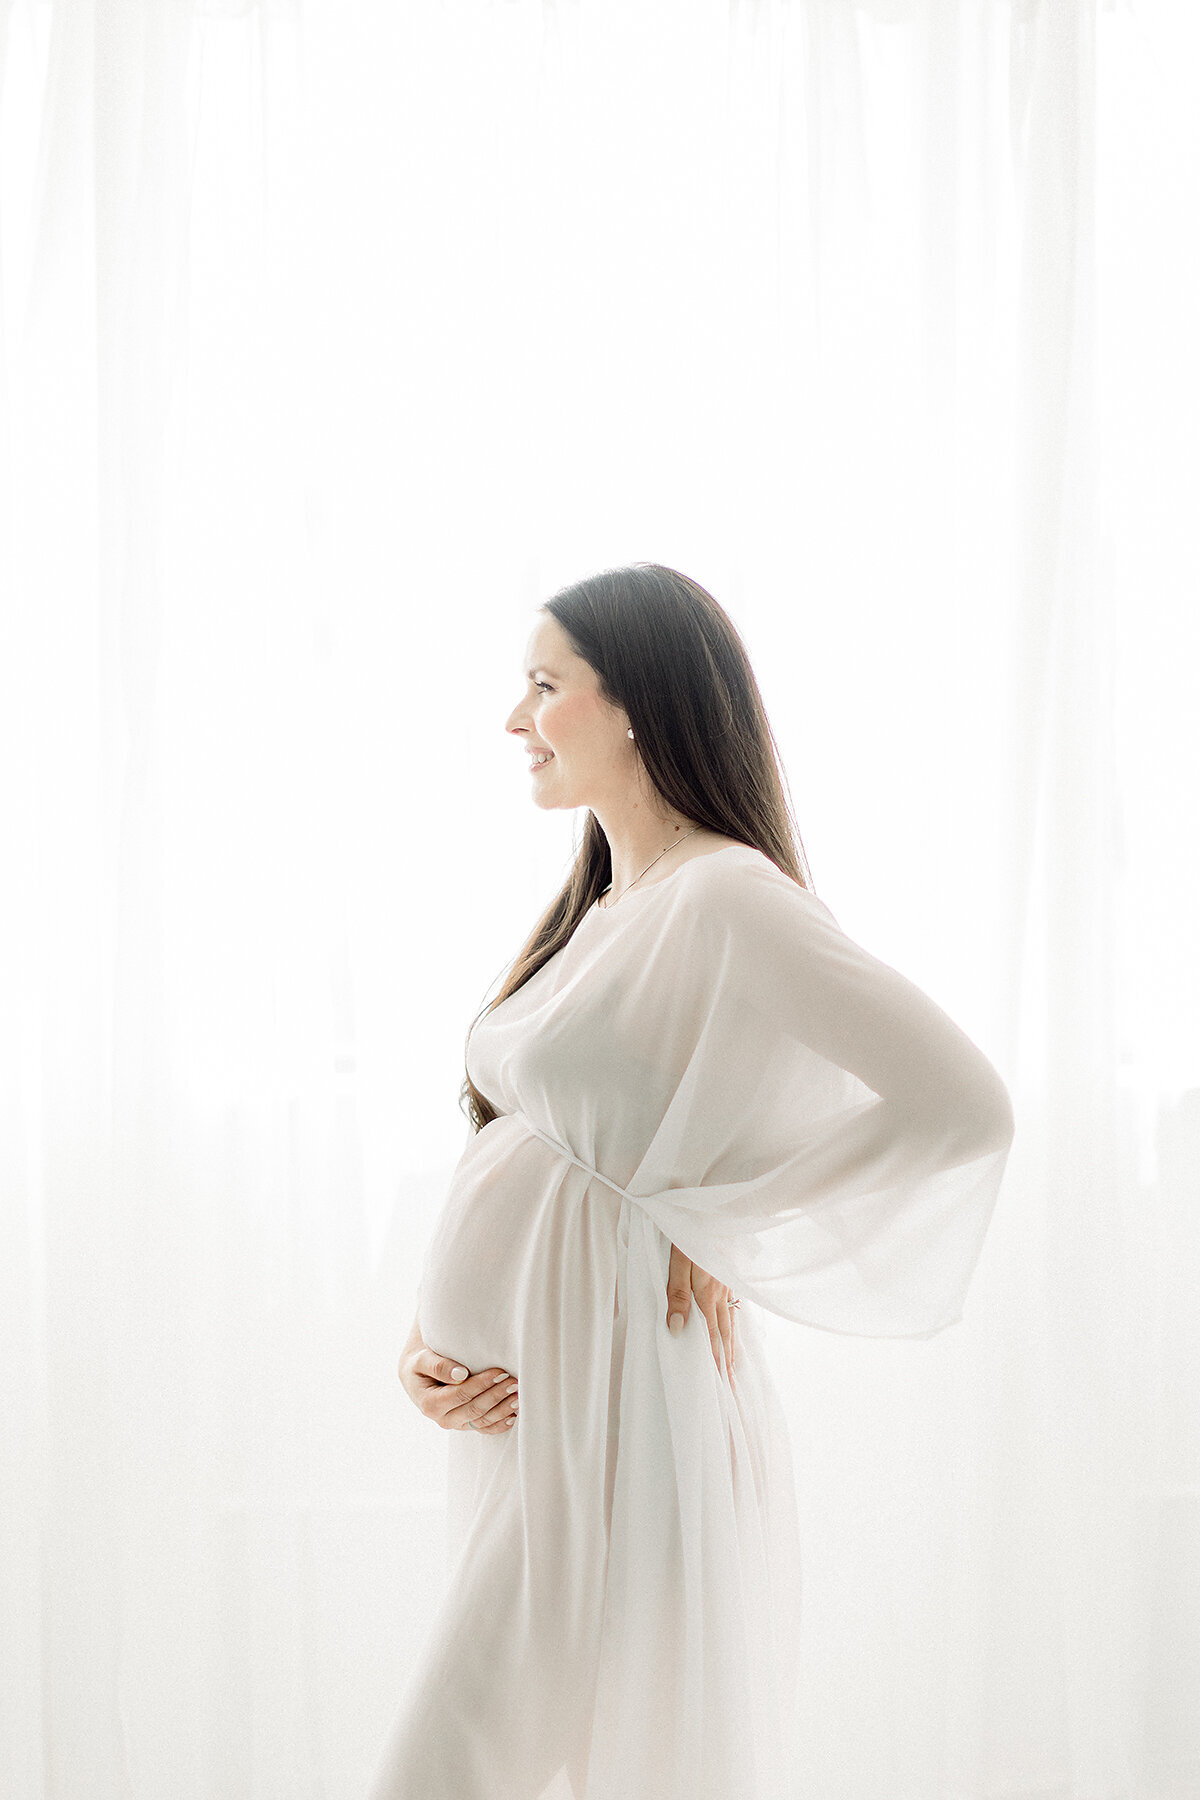 A pregnant mother dressed in a ivory chiffon maternity gown while she is standing in front of a window embracing her growing belly at a Dallas/Fort Worth photography studio.